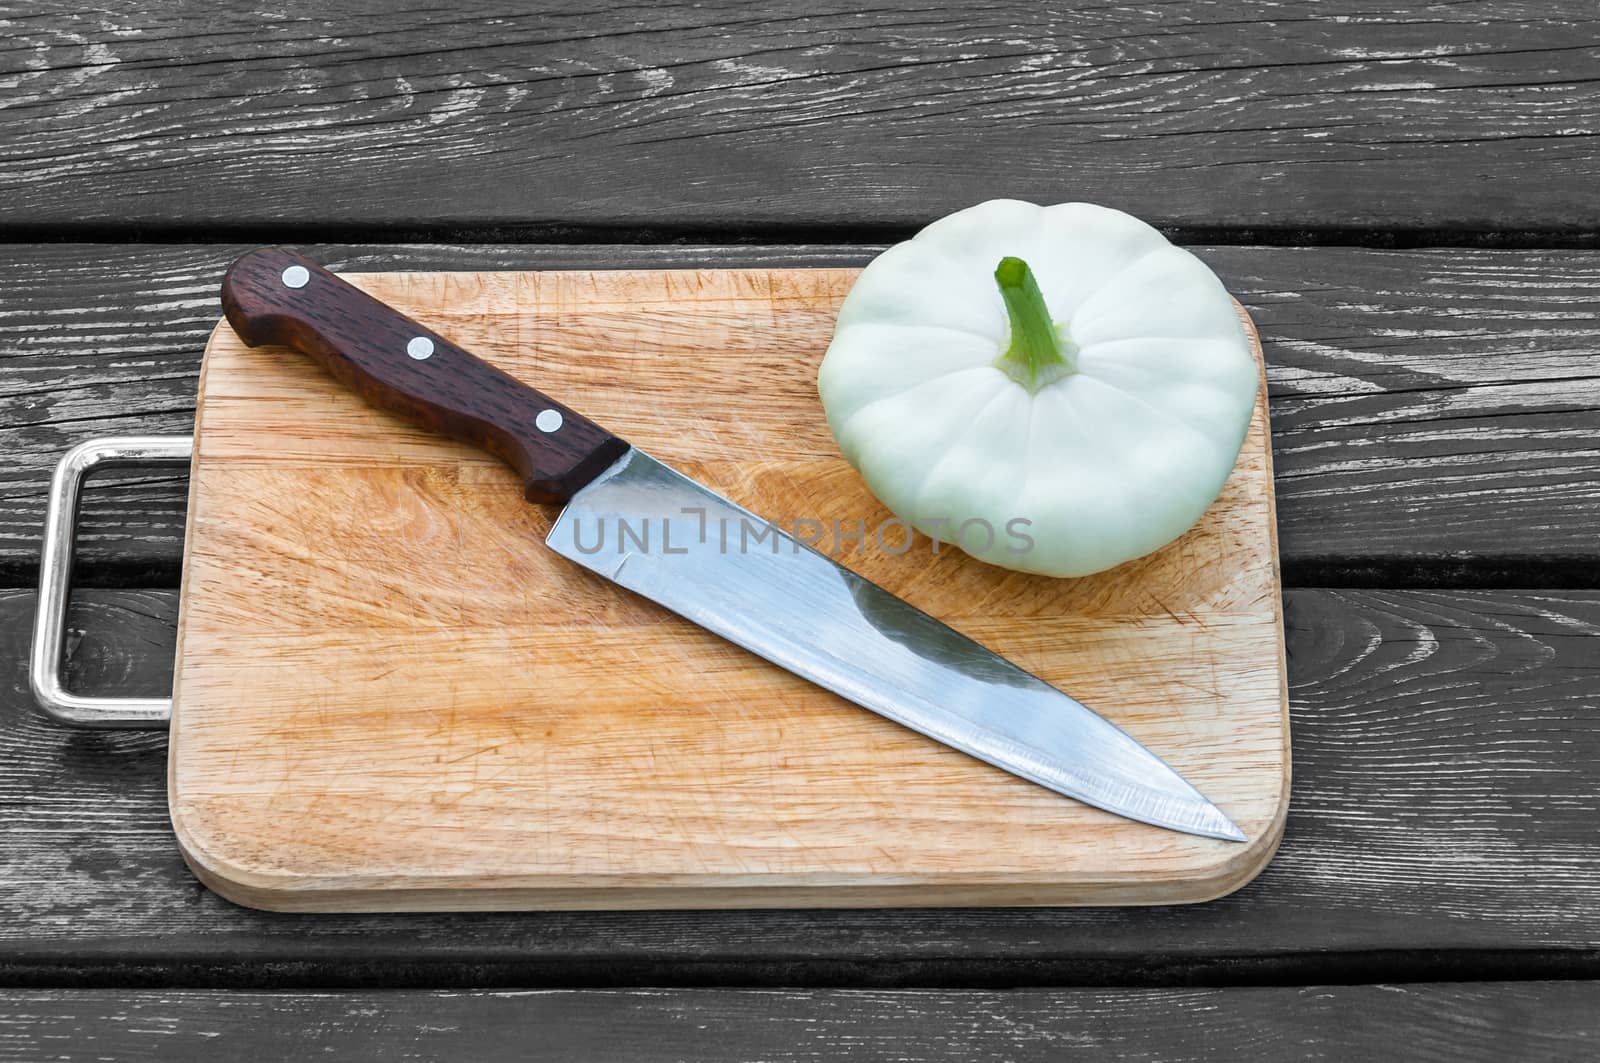 Squash on a cutting board on wooden background with a steel knife